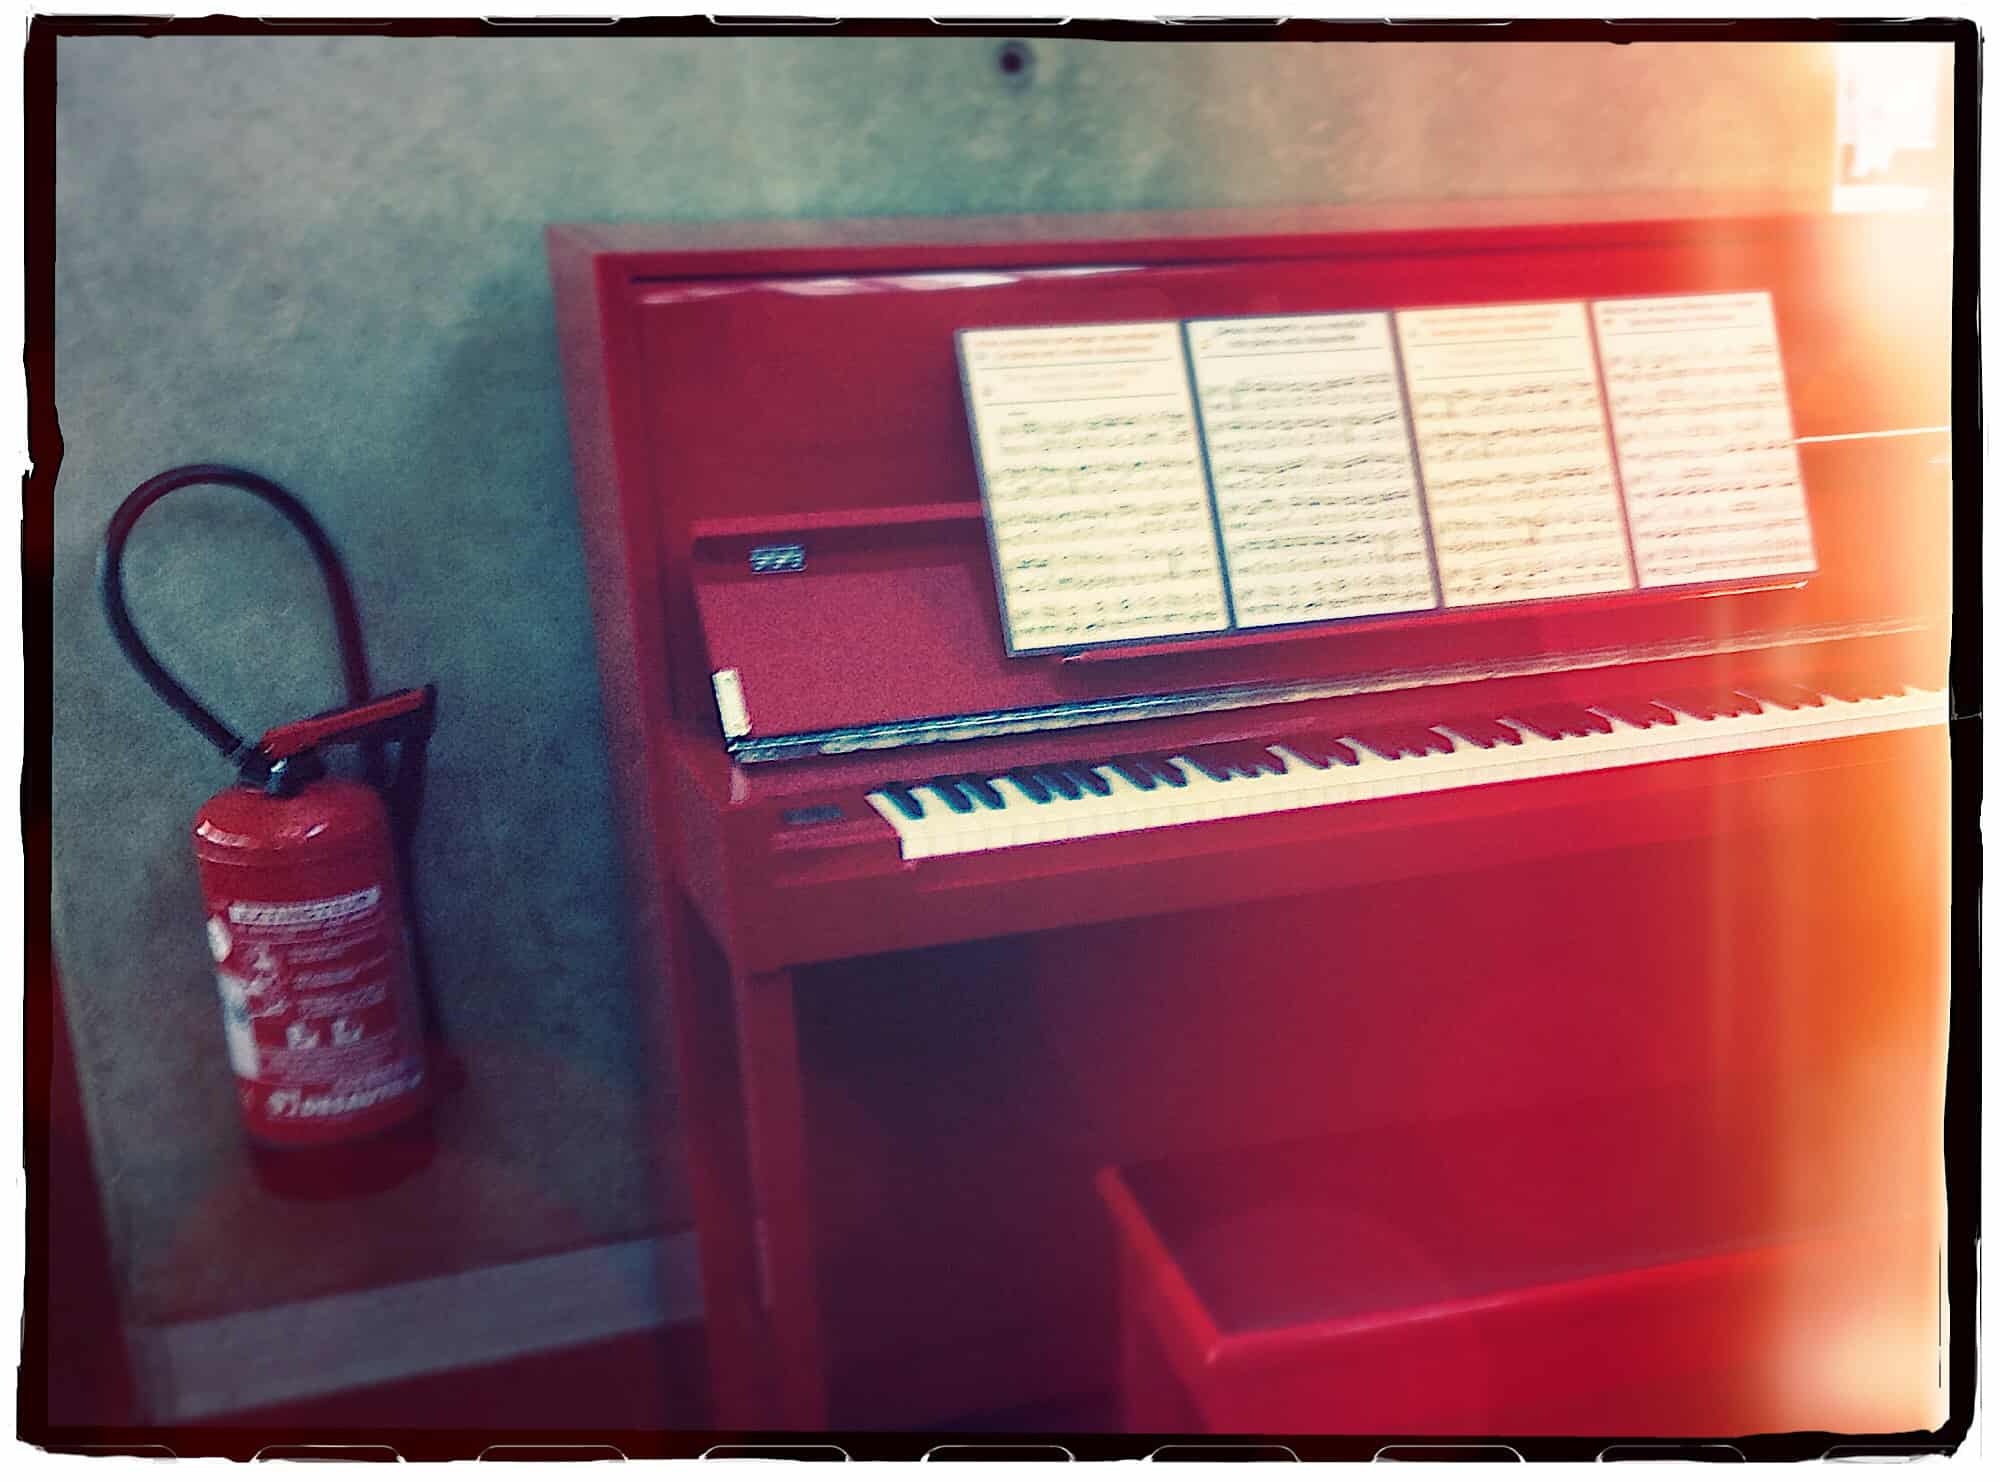 A piano next to a fire extinguisher is the perfect visual metaphor for Menace Synth.